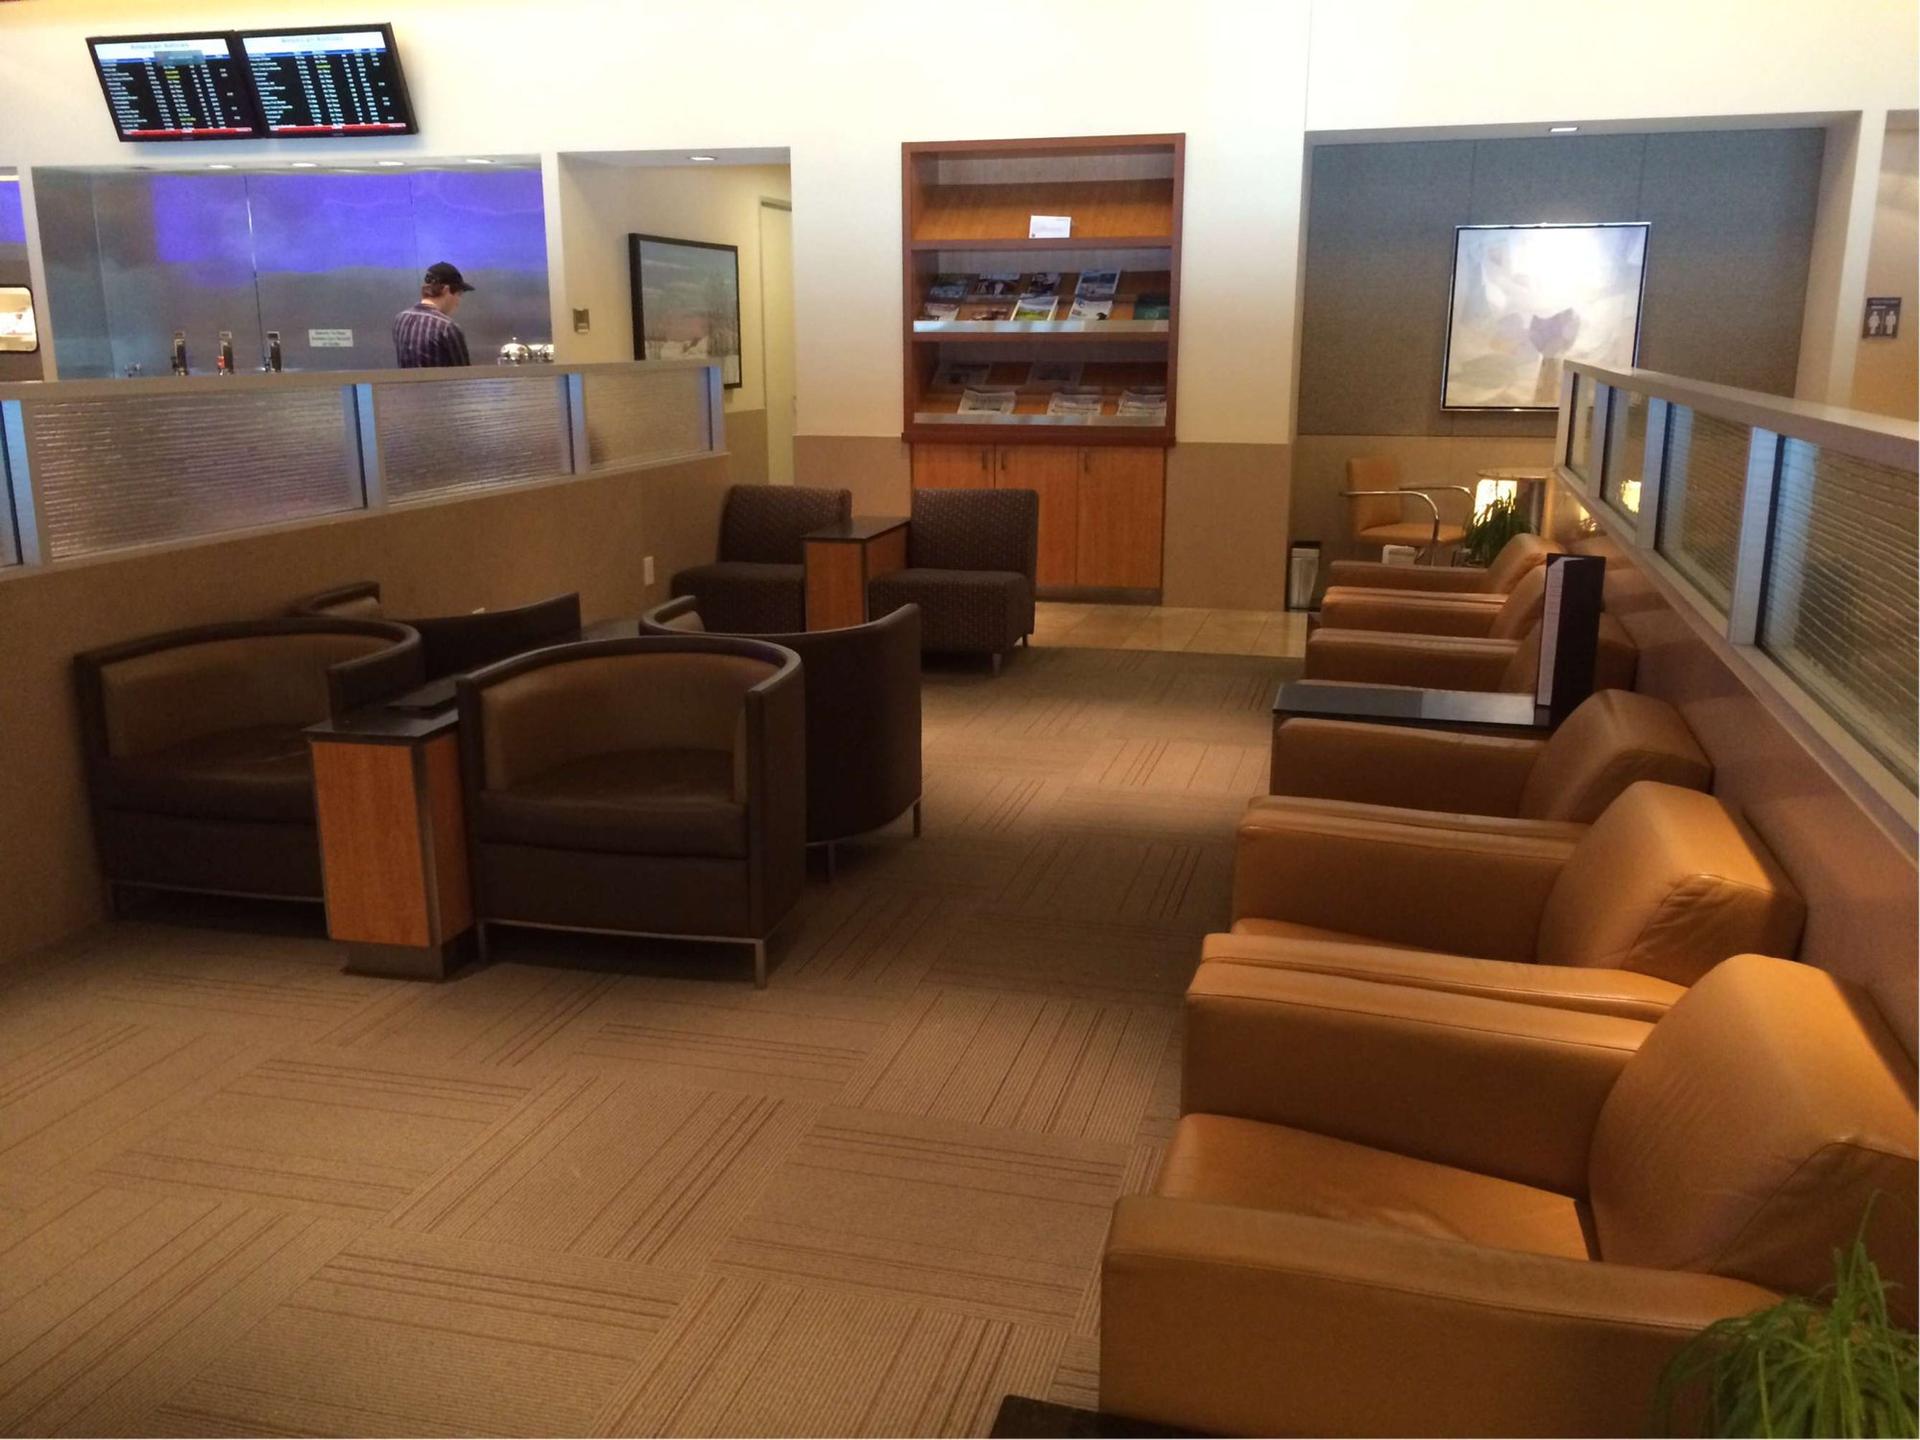 American Airlines Admirals Club image 1 of 31